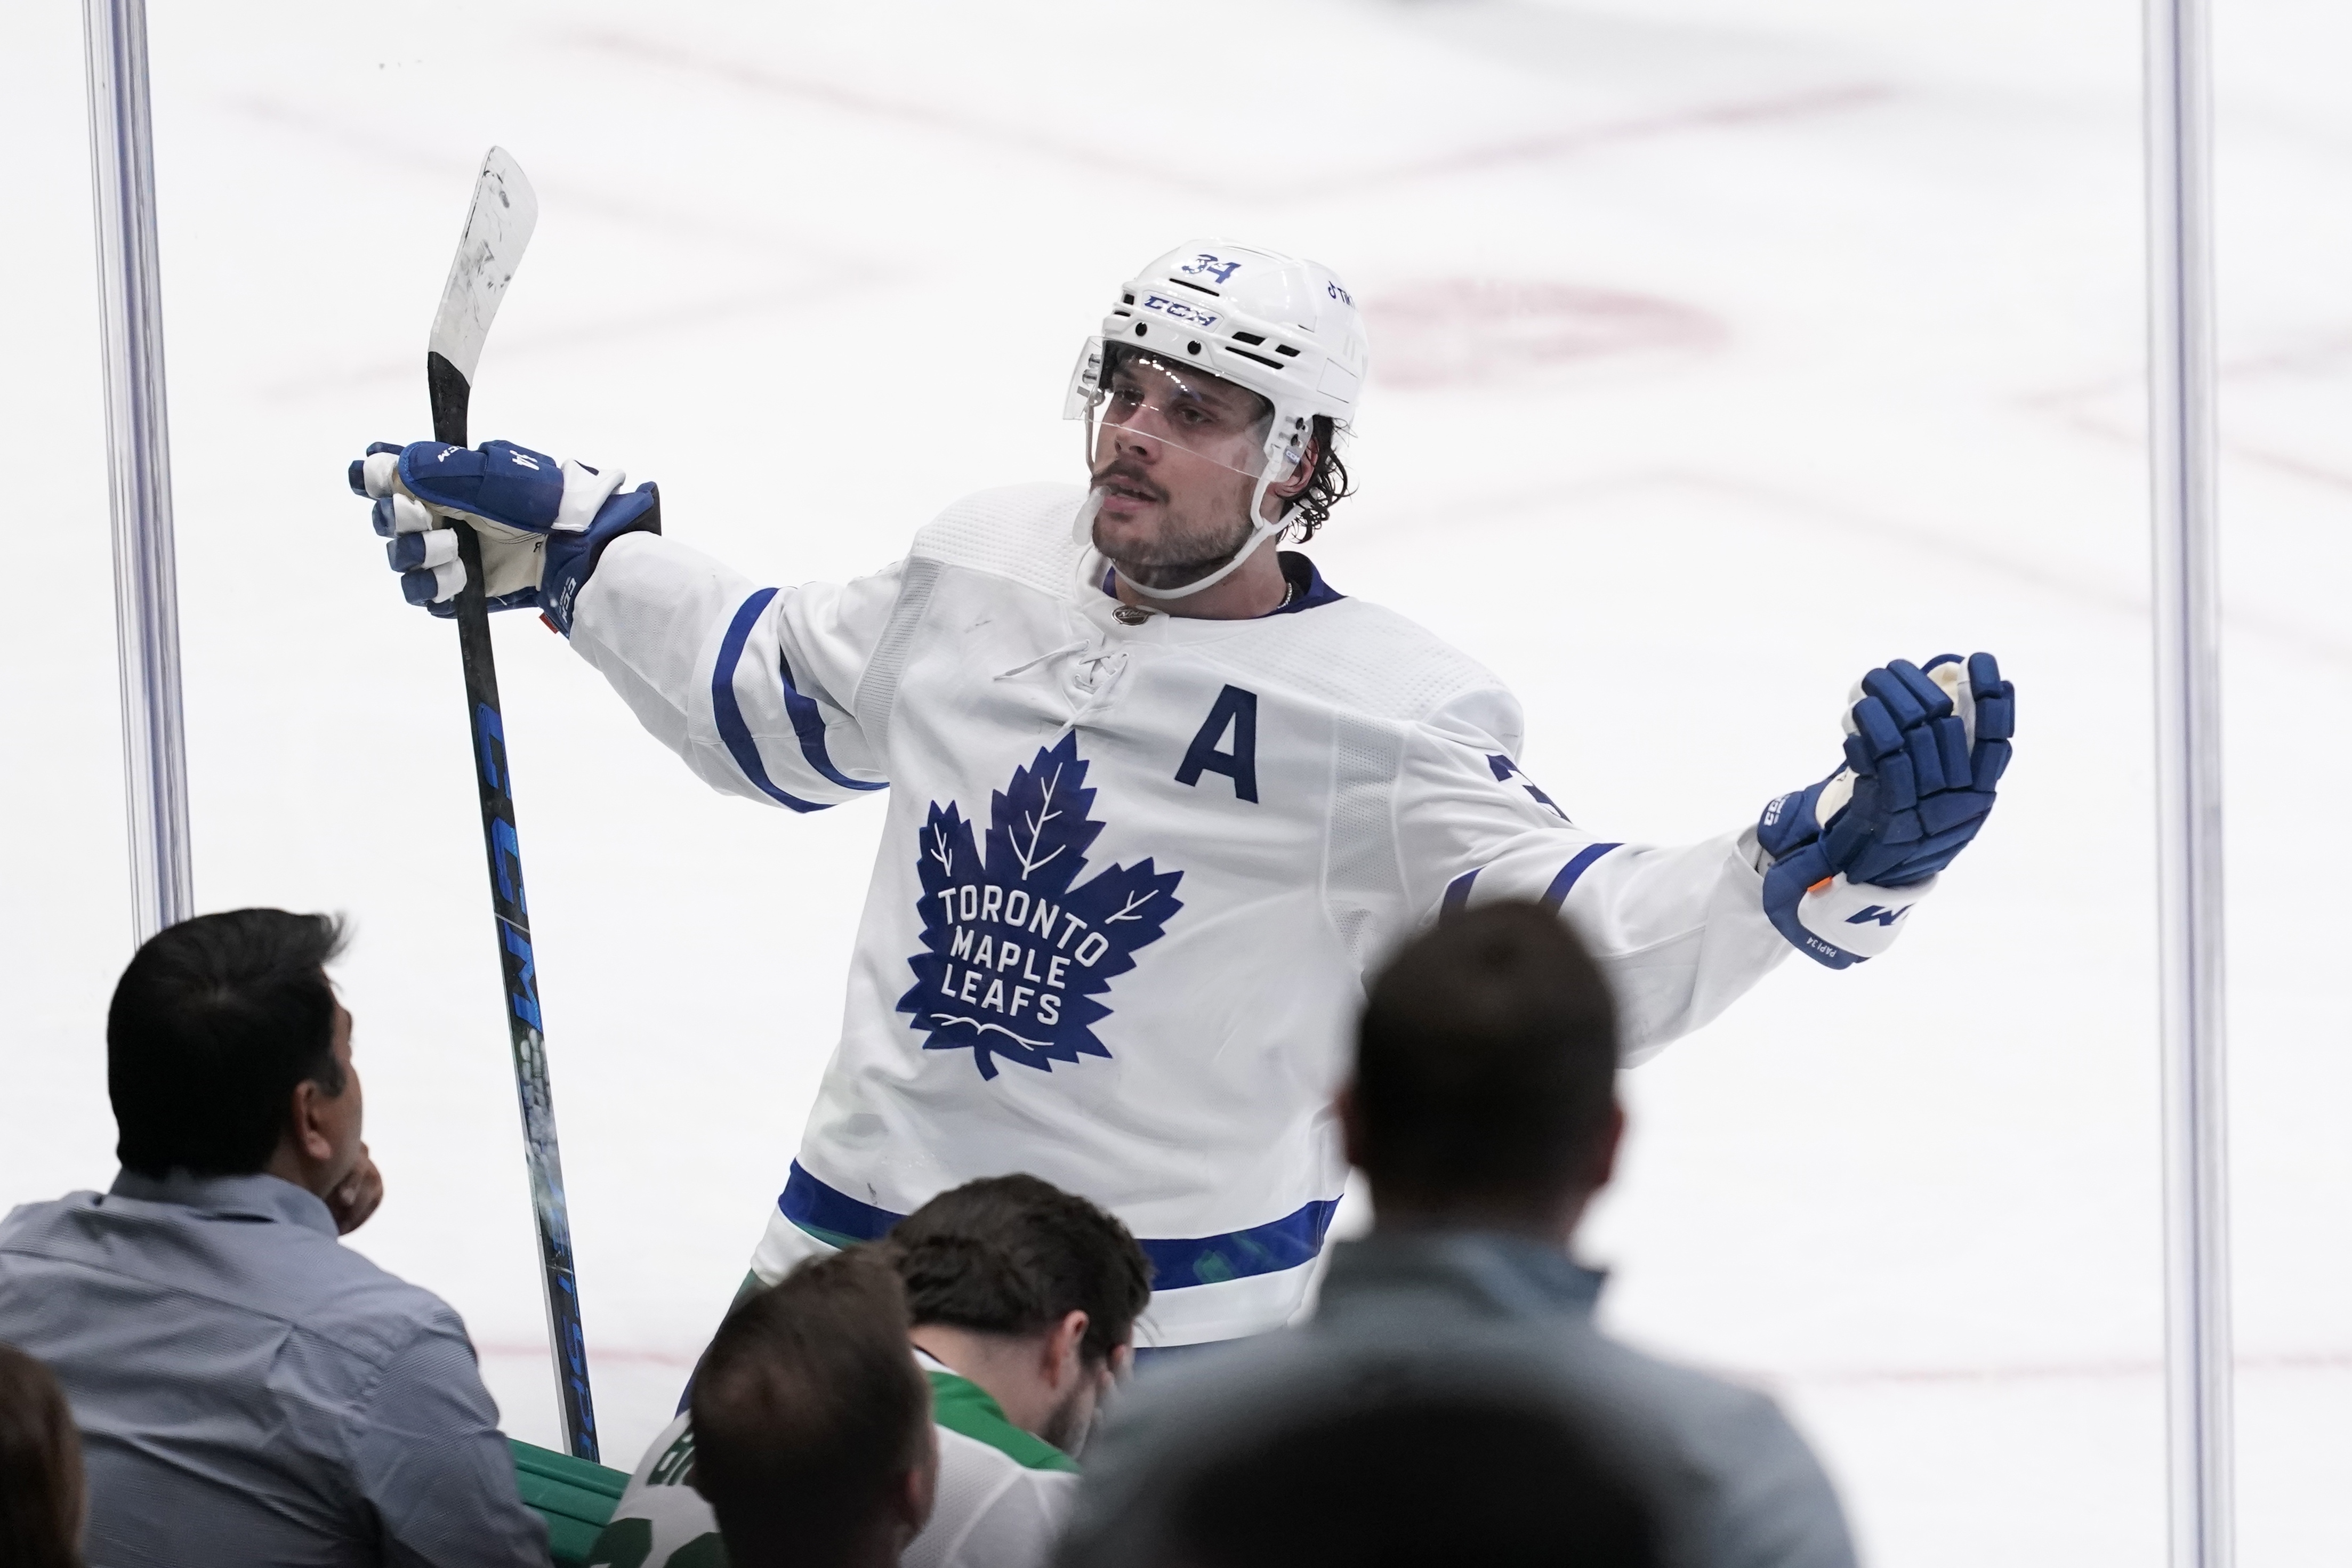 NHL Playoffs: The Toronto Maple Leafs got eliminated again. What